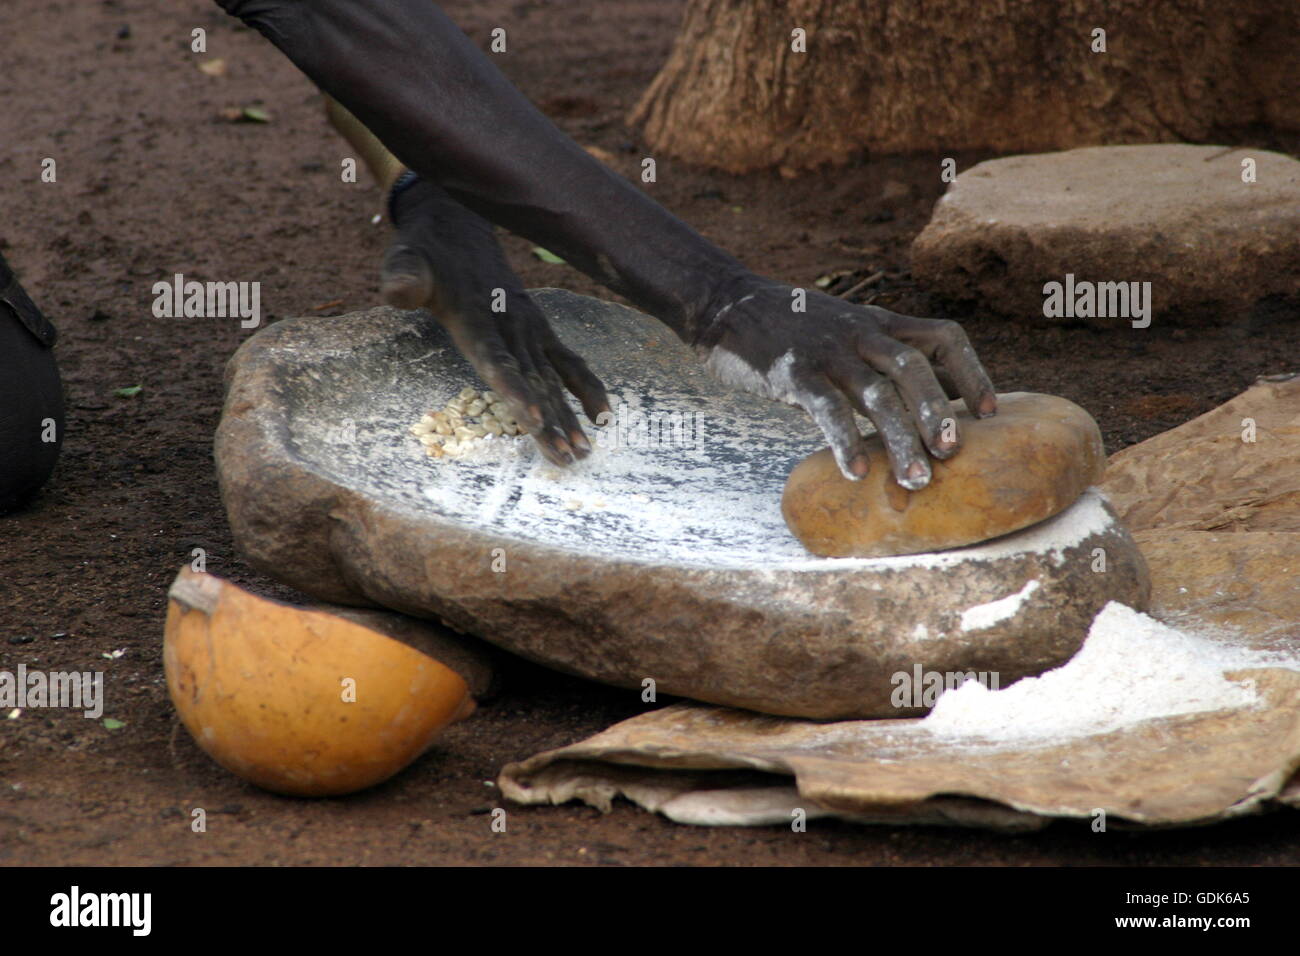 Grinding of maize, South Sudan Stock Photo